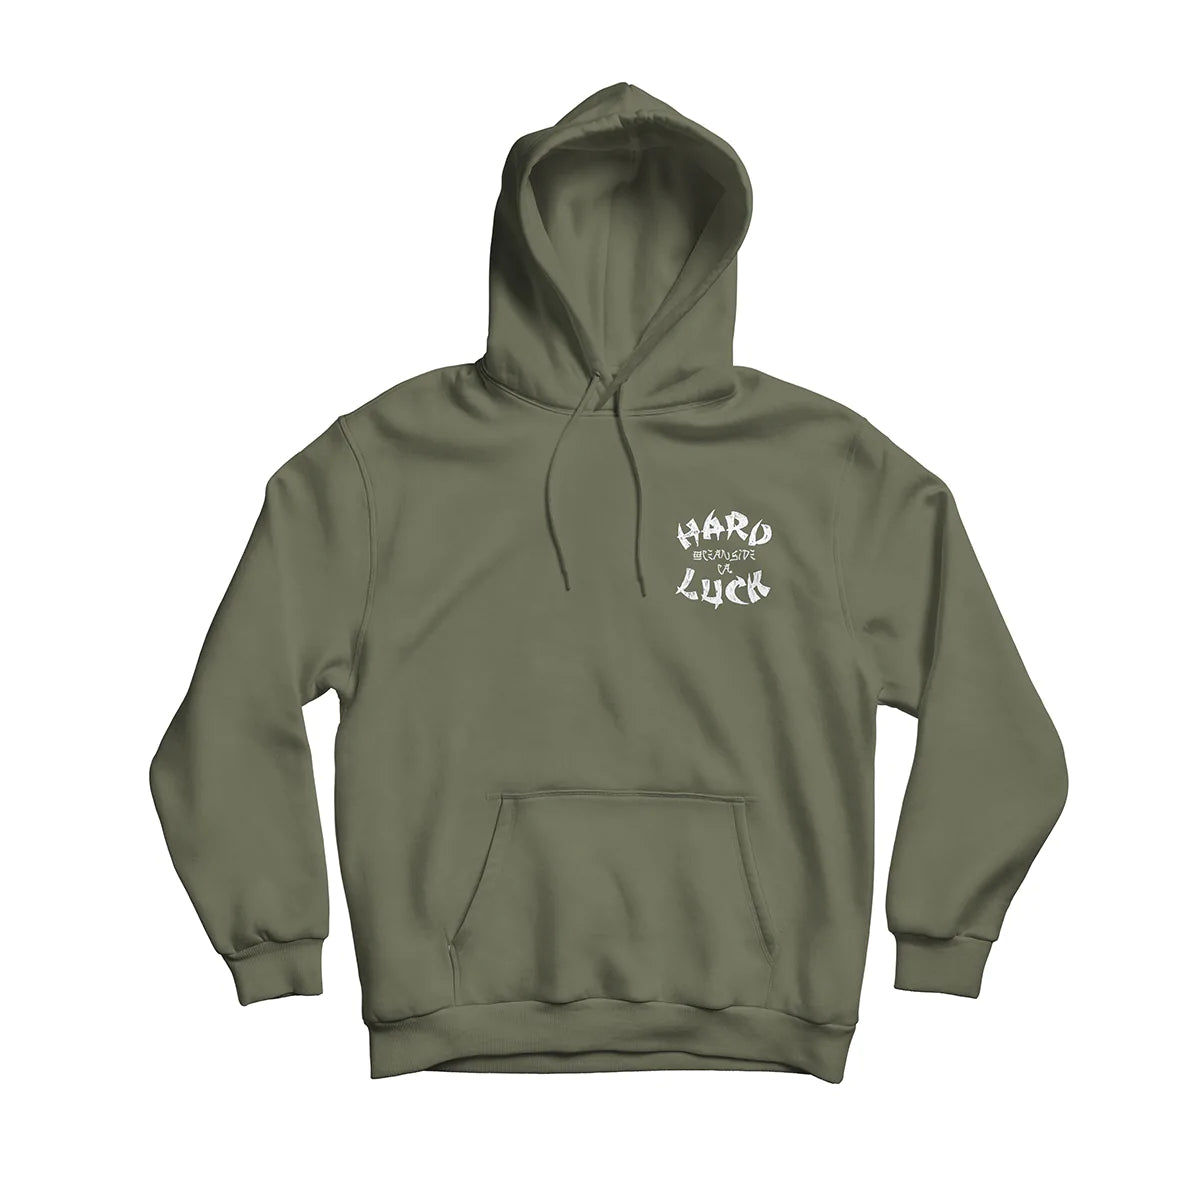 Chopper Pullover Hoodie Army Green/White(size options listed)